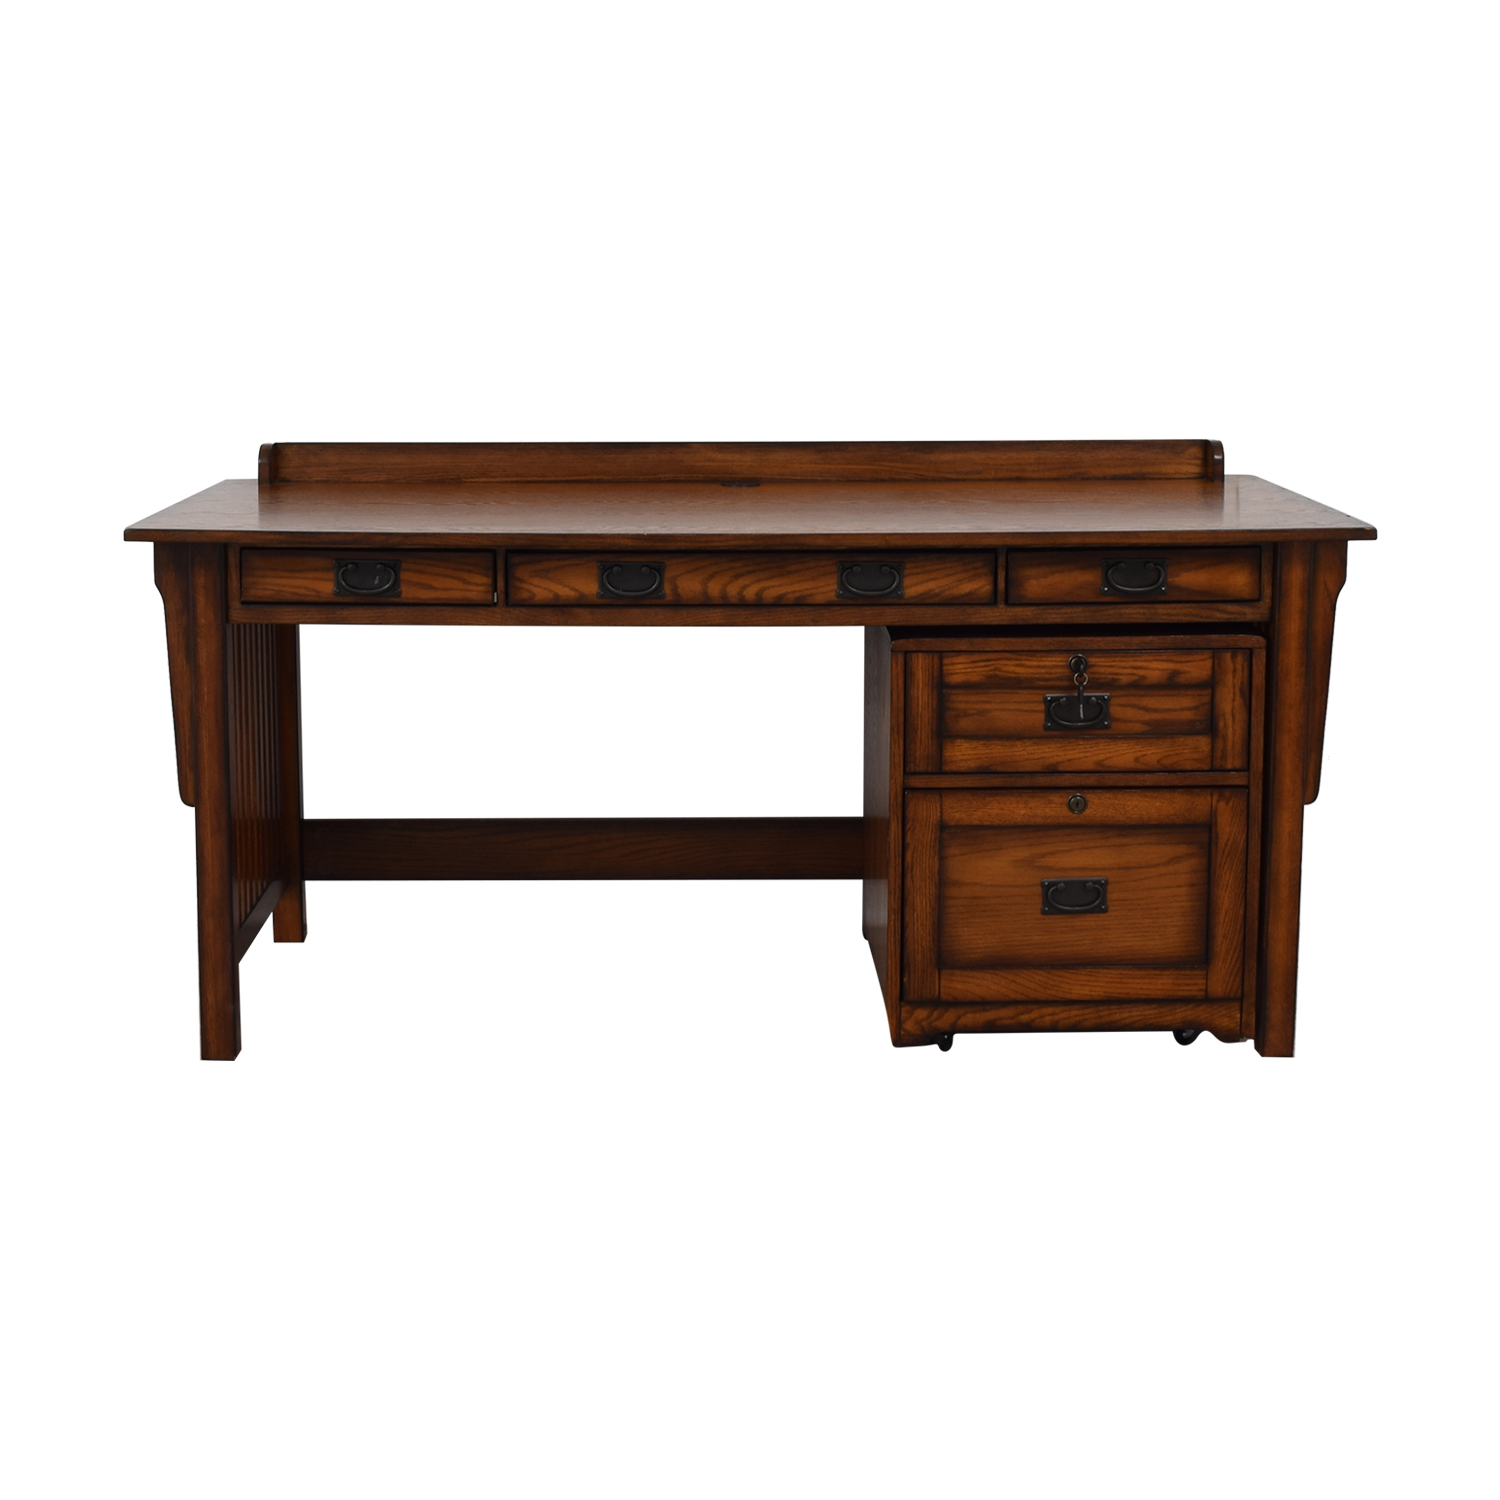 90 Off Hammary Furniture Hammary Furniture Wood Desk And File within proportions 1500 X 1500